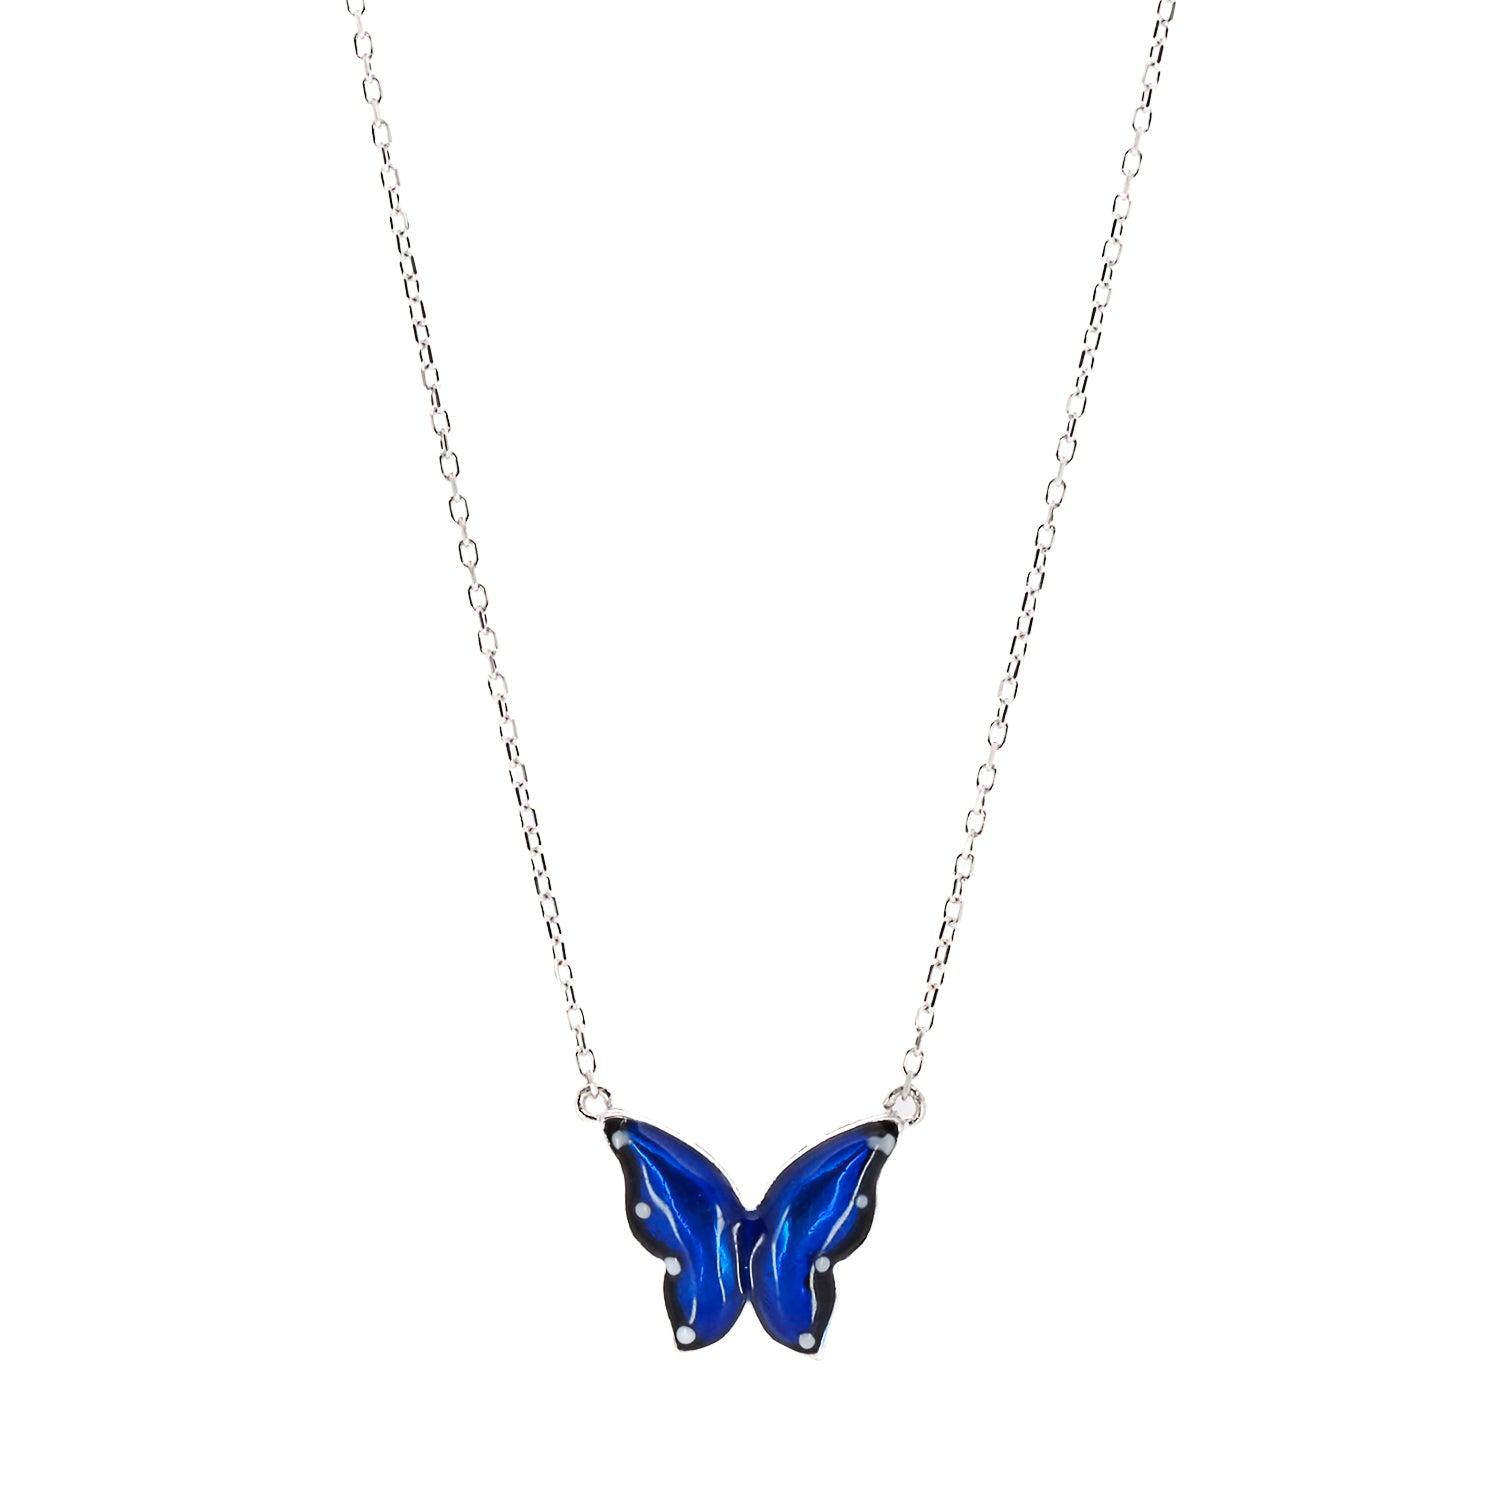 Close-up shot of the intricate blue enamel design on the butterfly pendant, symbolizing transformation and spiritual growth.